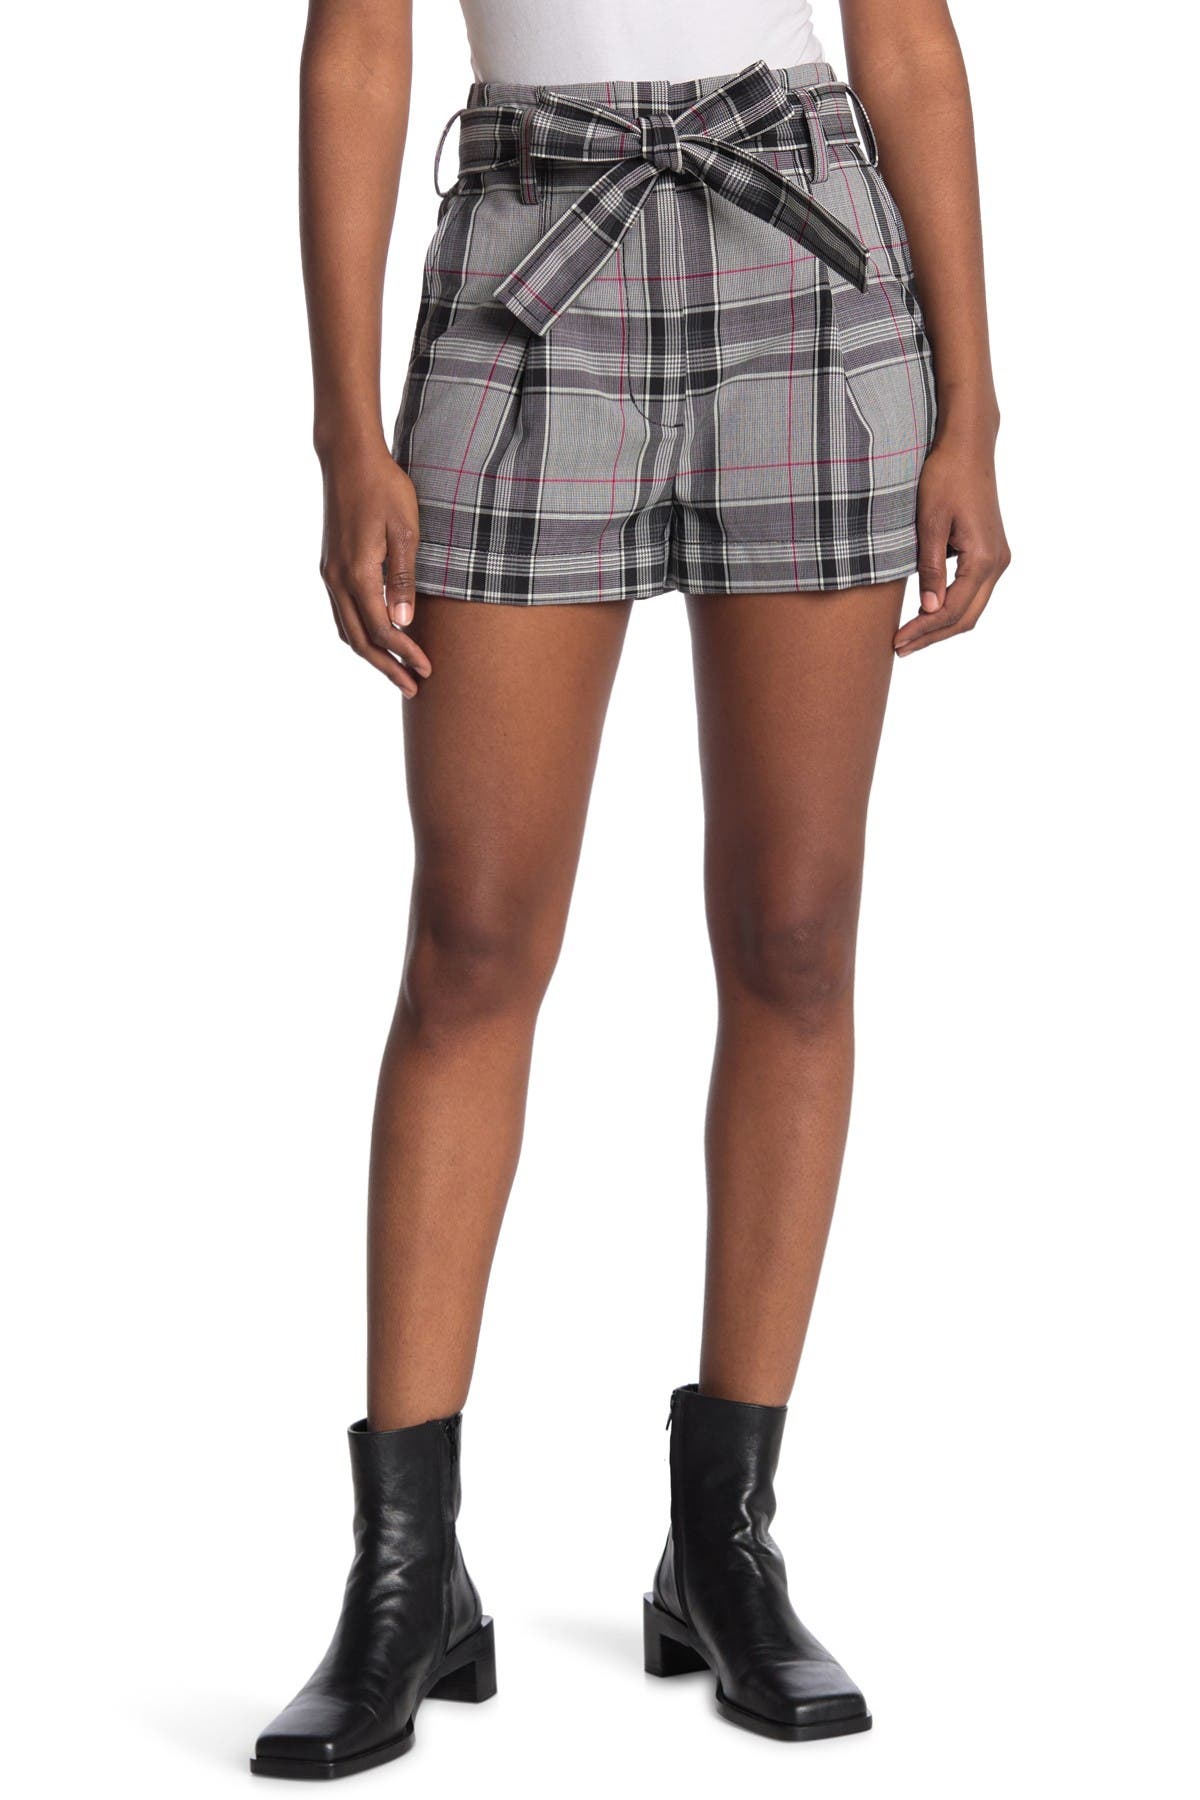 3.1 PHILLIP LIM / フィリップ リム PLAID BELTED HIGH WAISTED SHORTS,439113860421